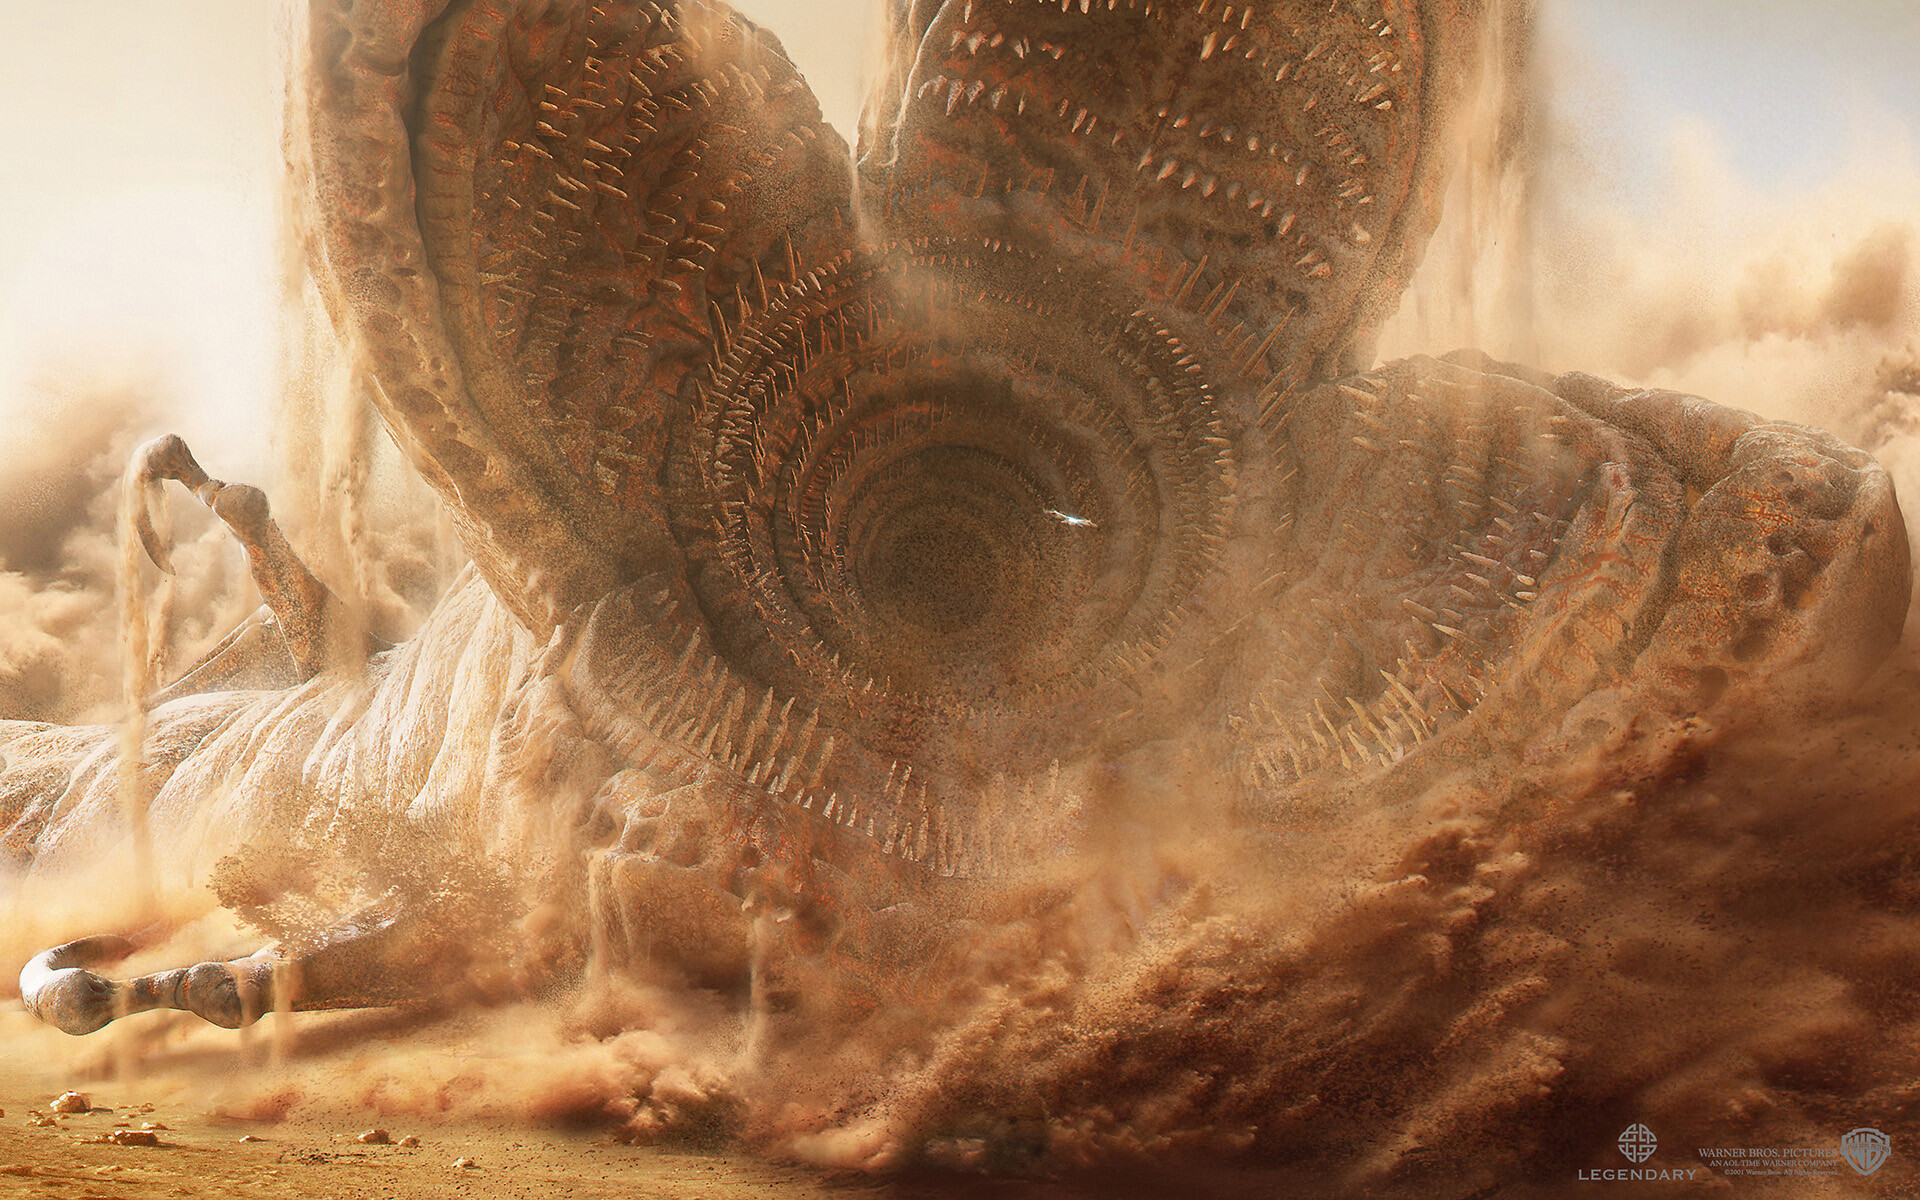 Page 202-203 - Early sandworm concept art © Legendary Pictures, All rights ...